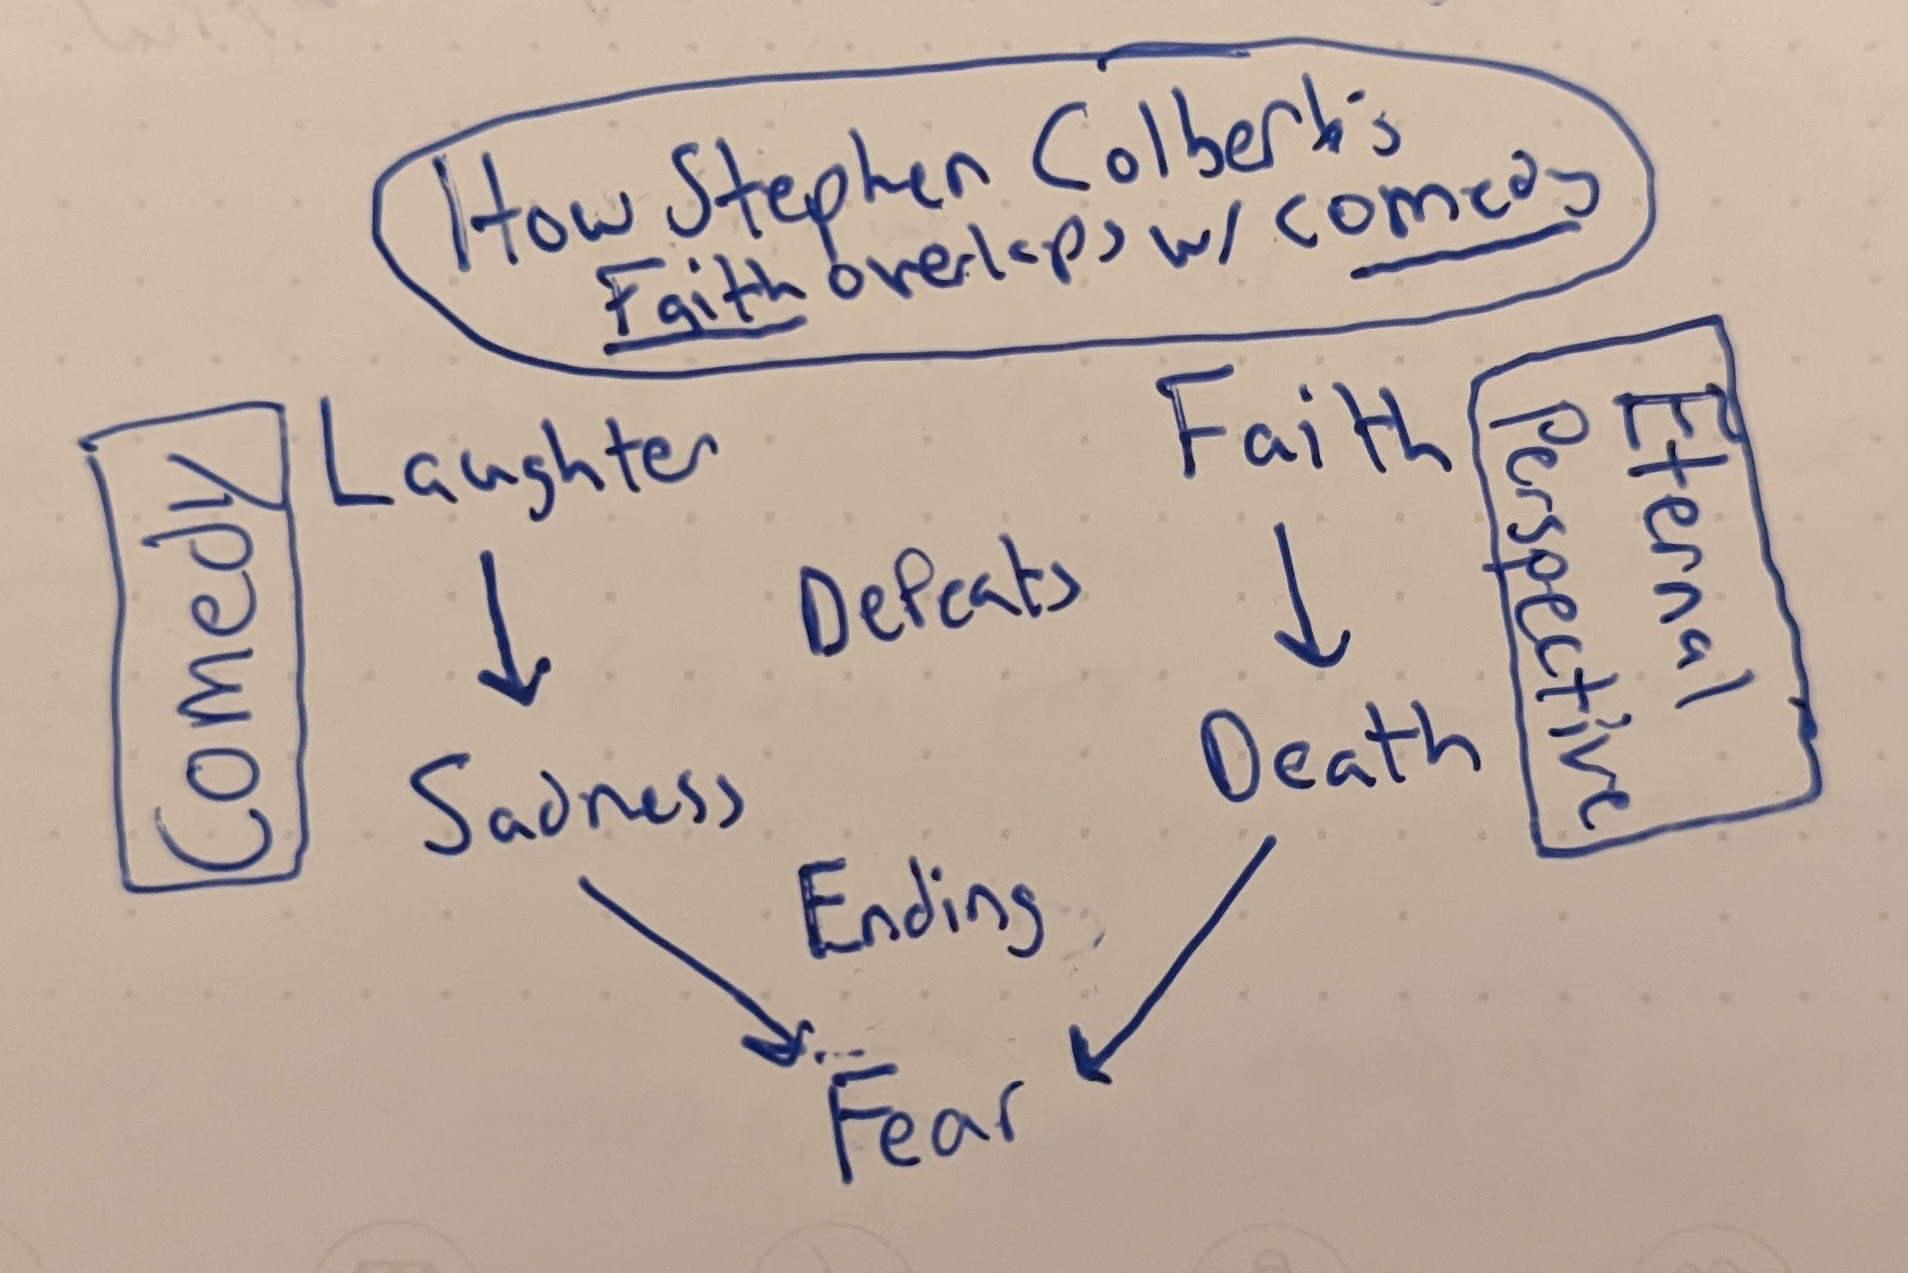 A hand-drawn diagram of how Stephen Colber's faith overlaps with comedy.